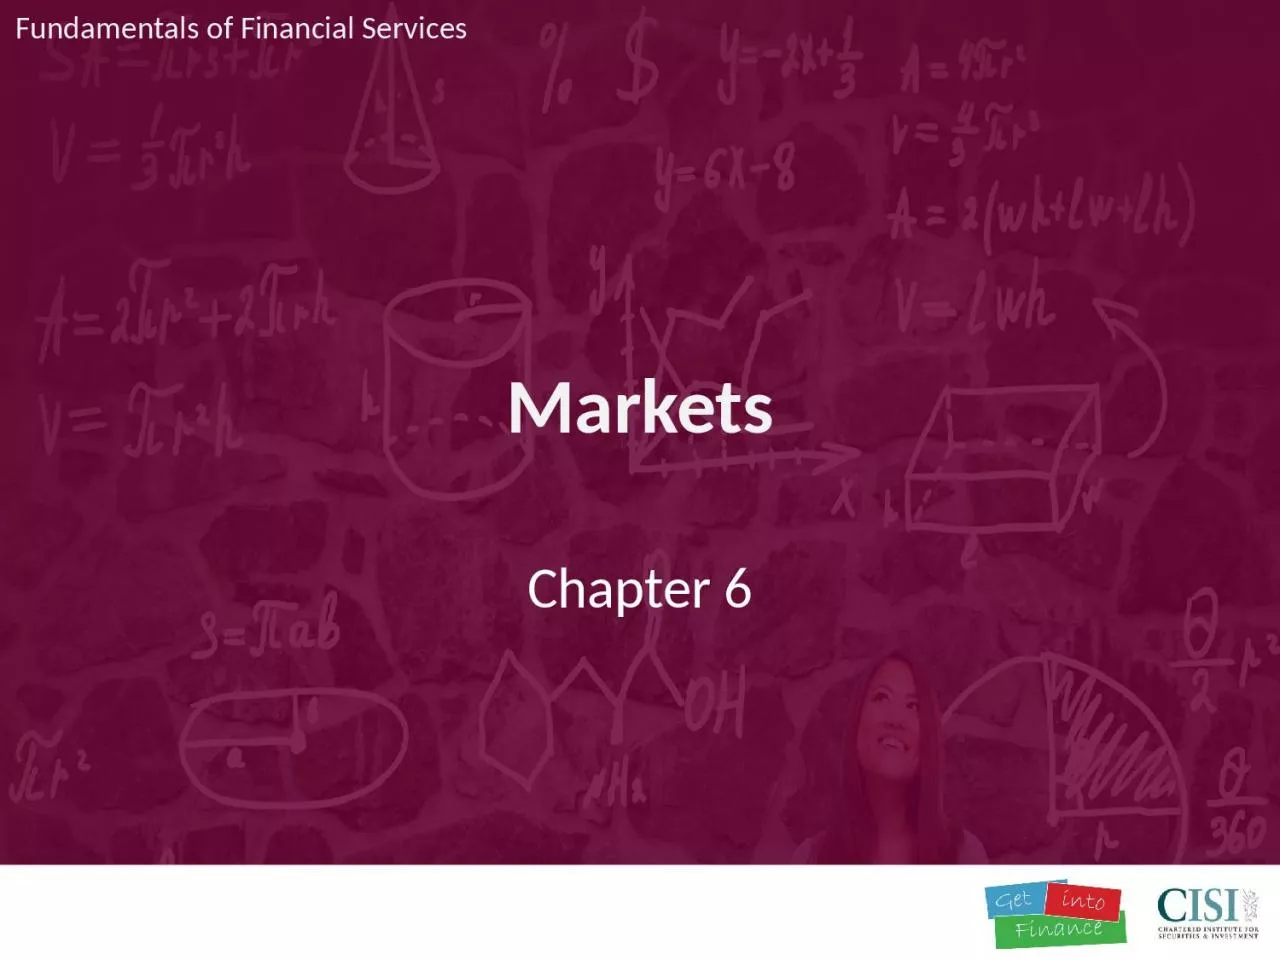 Markets Chapter 6 Fundamentals of Financial Services